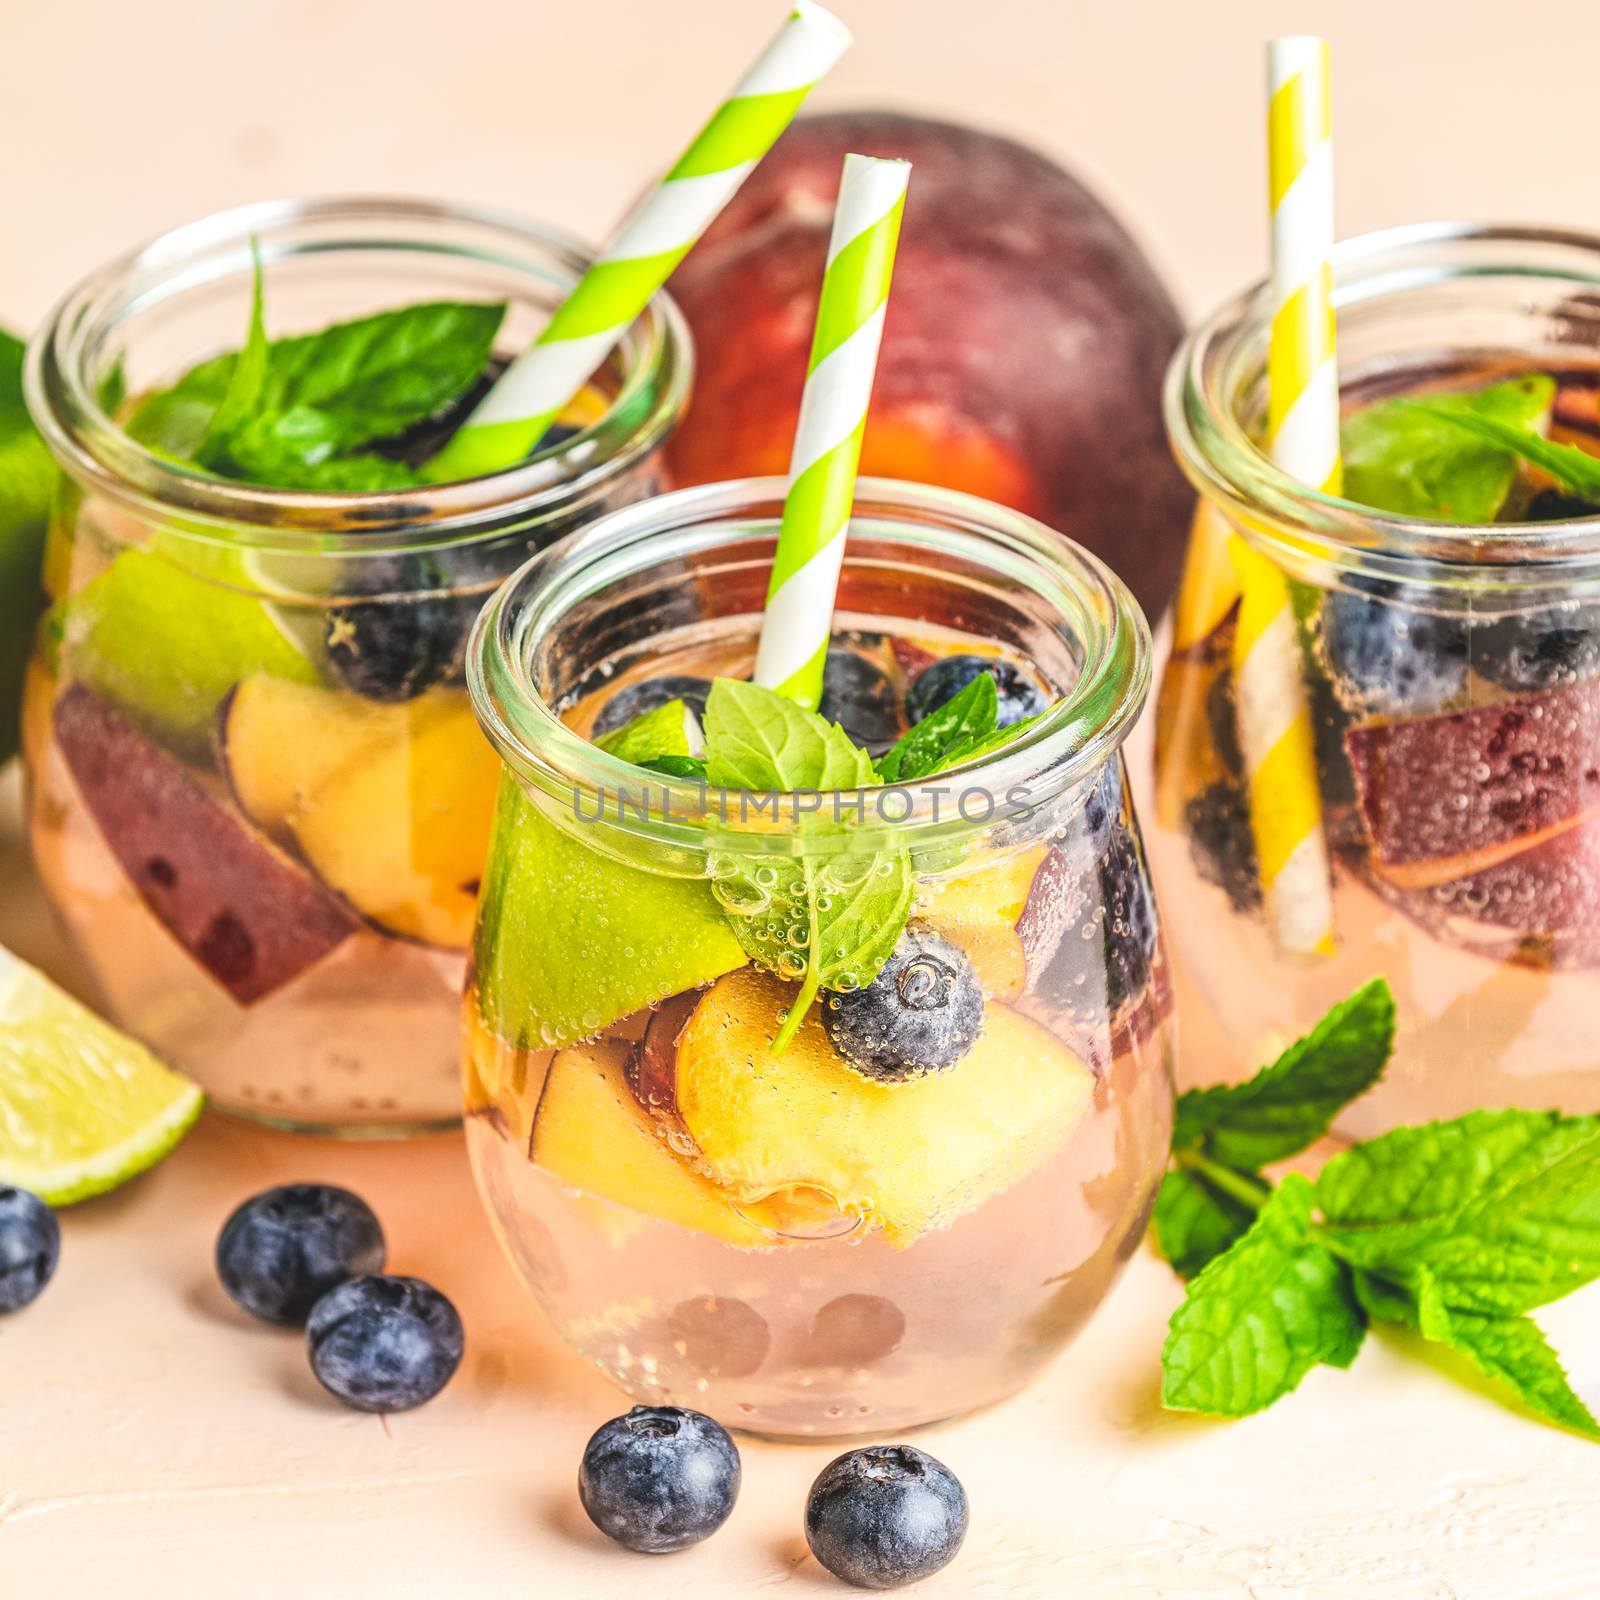 Blueberry and peach infused water by ArtSvitlyna